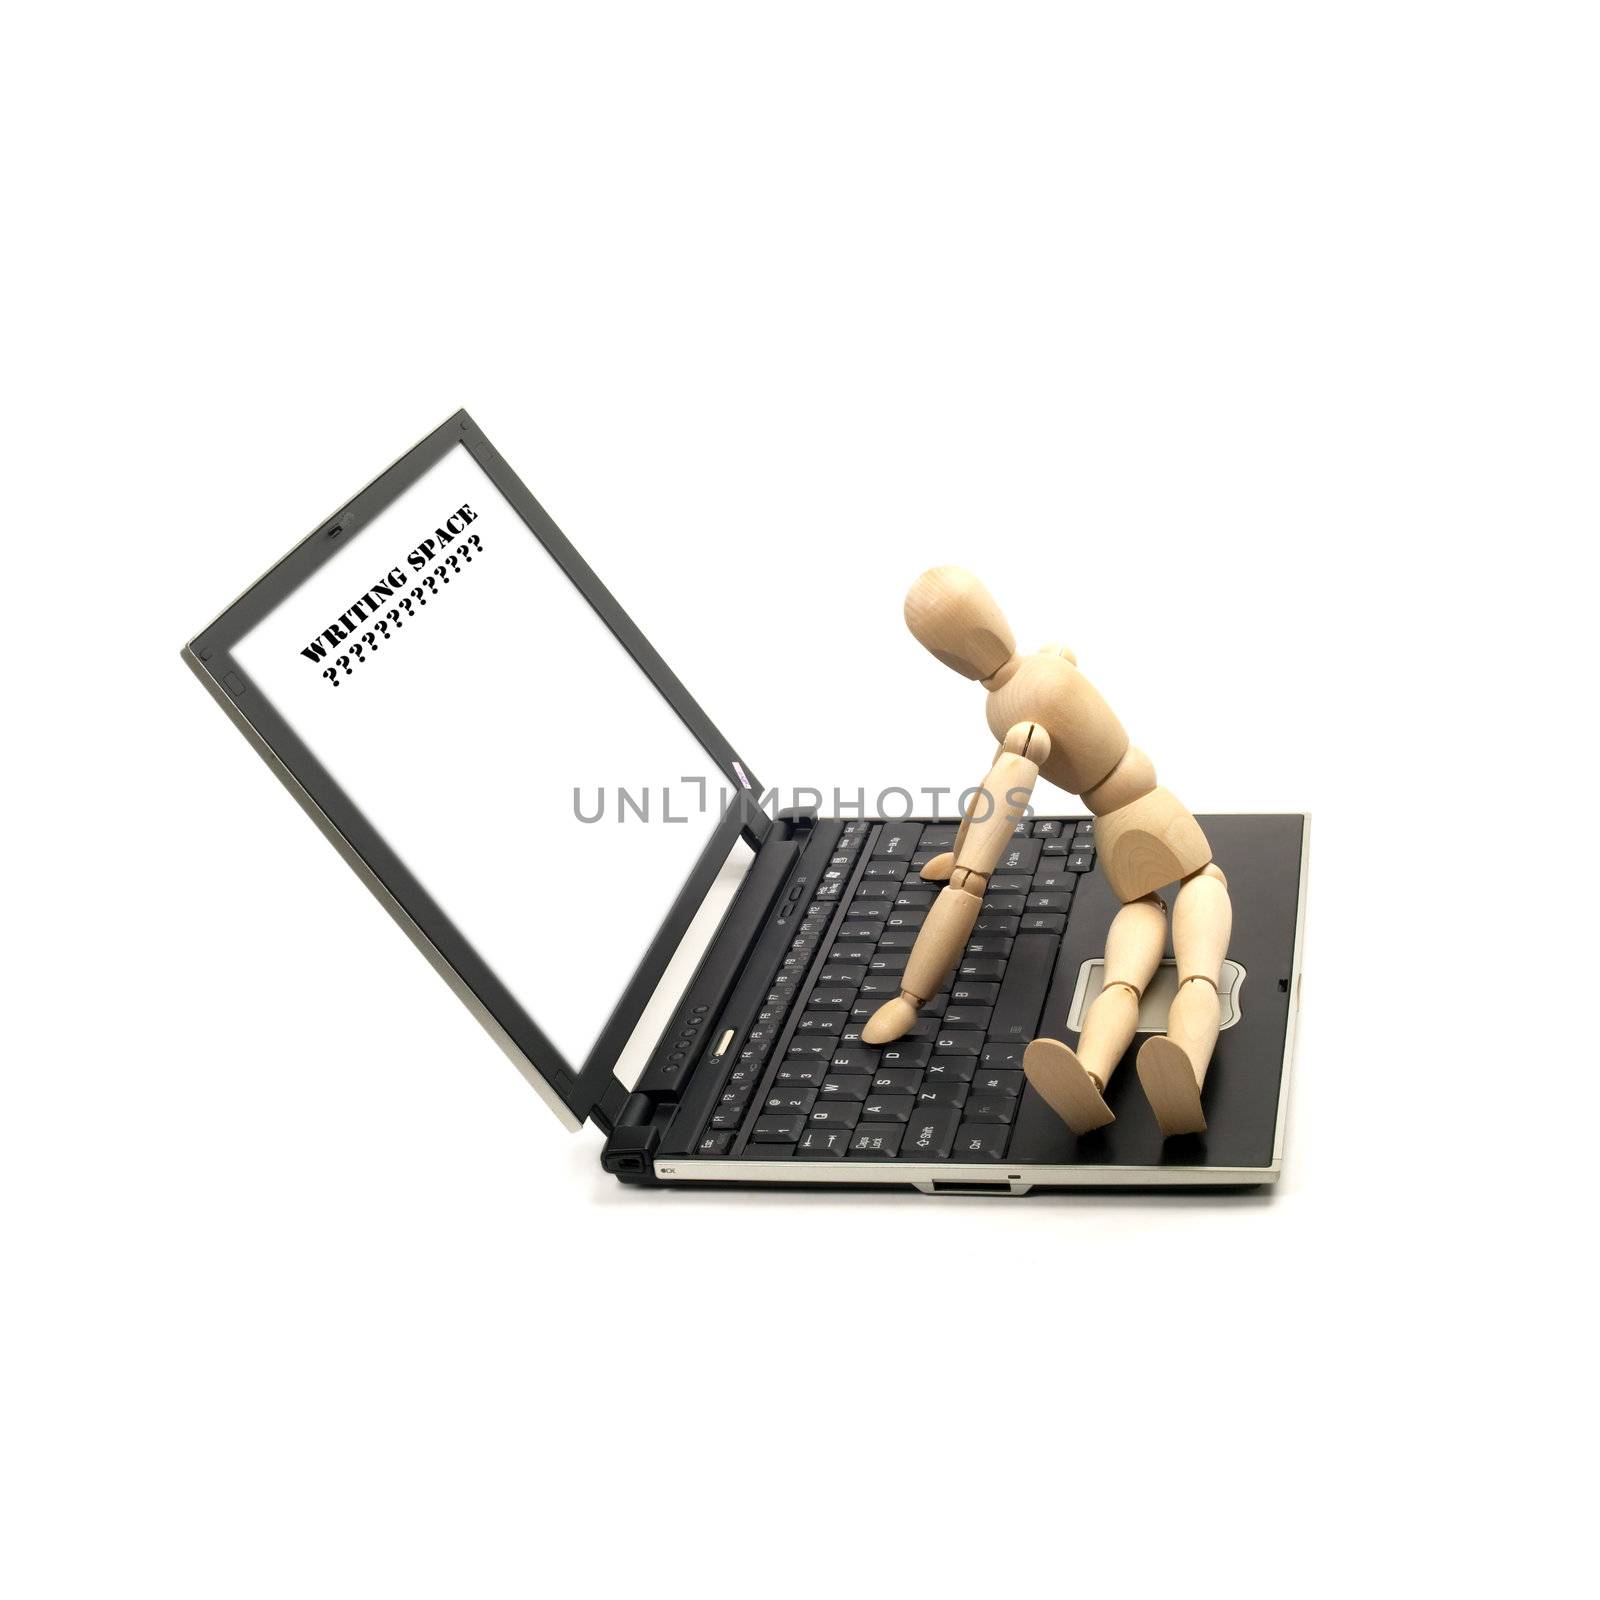 wood mannequin and laptop by keko64